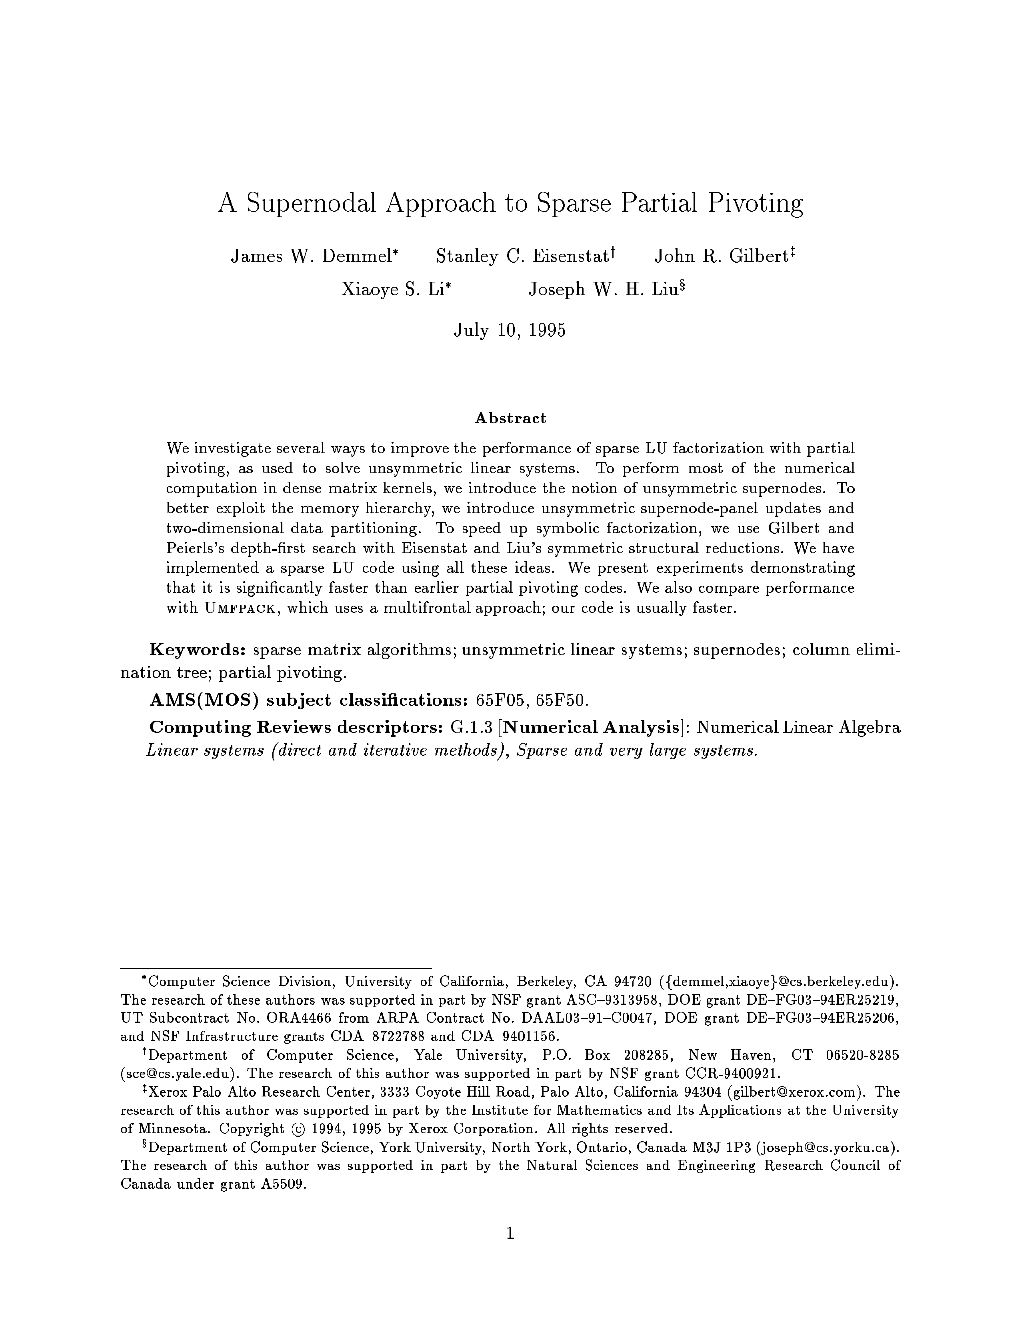 A Supernodal Approach to Sparse Partial Pivoting